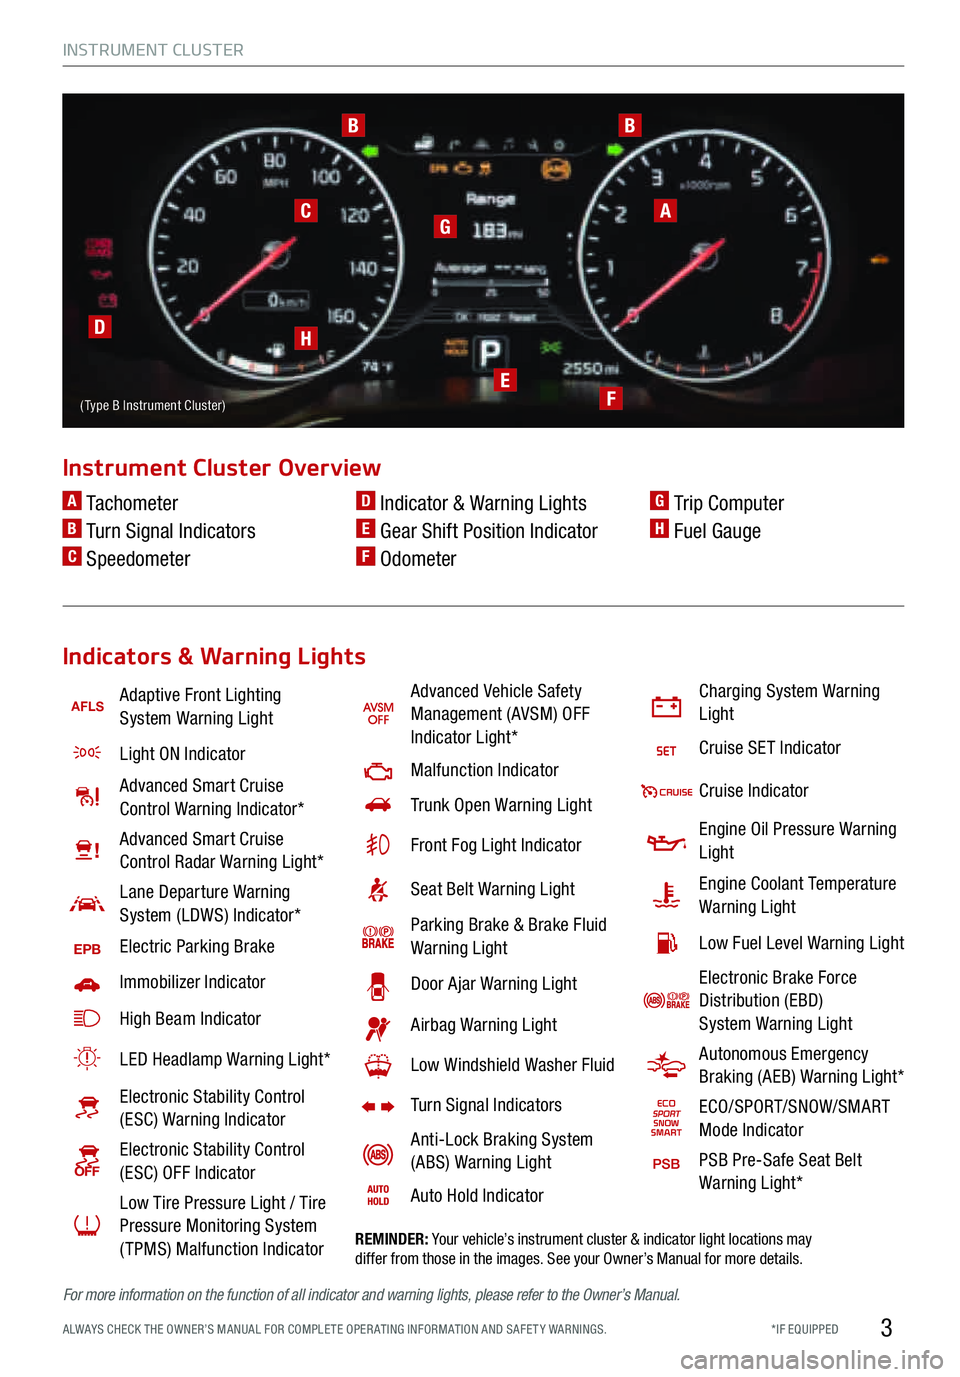 KIA K900 2016  Features and Functions Guide INSTRUMENT CLUSTER
3*IF EQUIPPED  
A LWAYS  CHECK THE OWNER’S  MANUAL FOR COMPLETE  OPERATING INFORMATION  AND SAFETY  WARNINGS.
AFLSAdaptive Front Lighting  
System  Warning  Light
Light ON Indicat